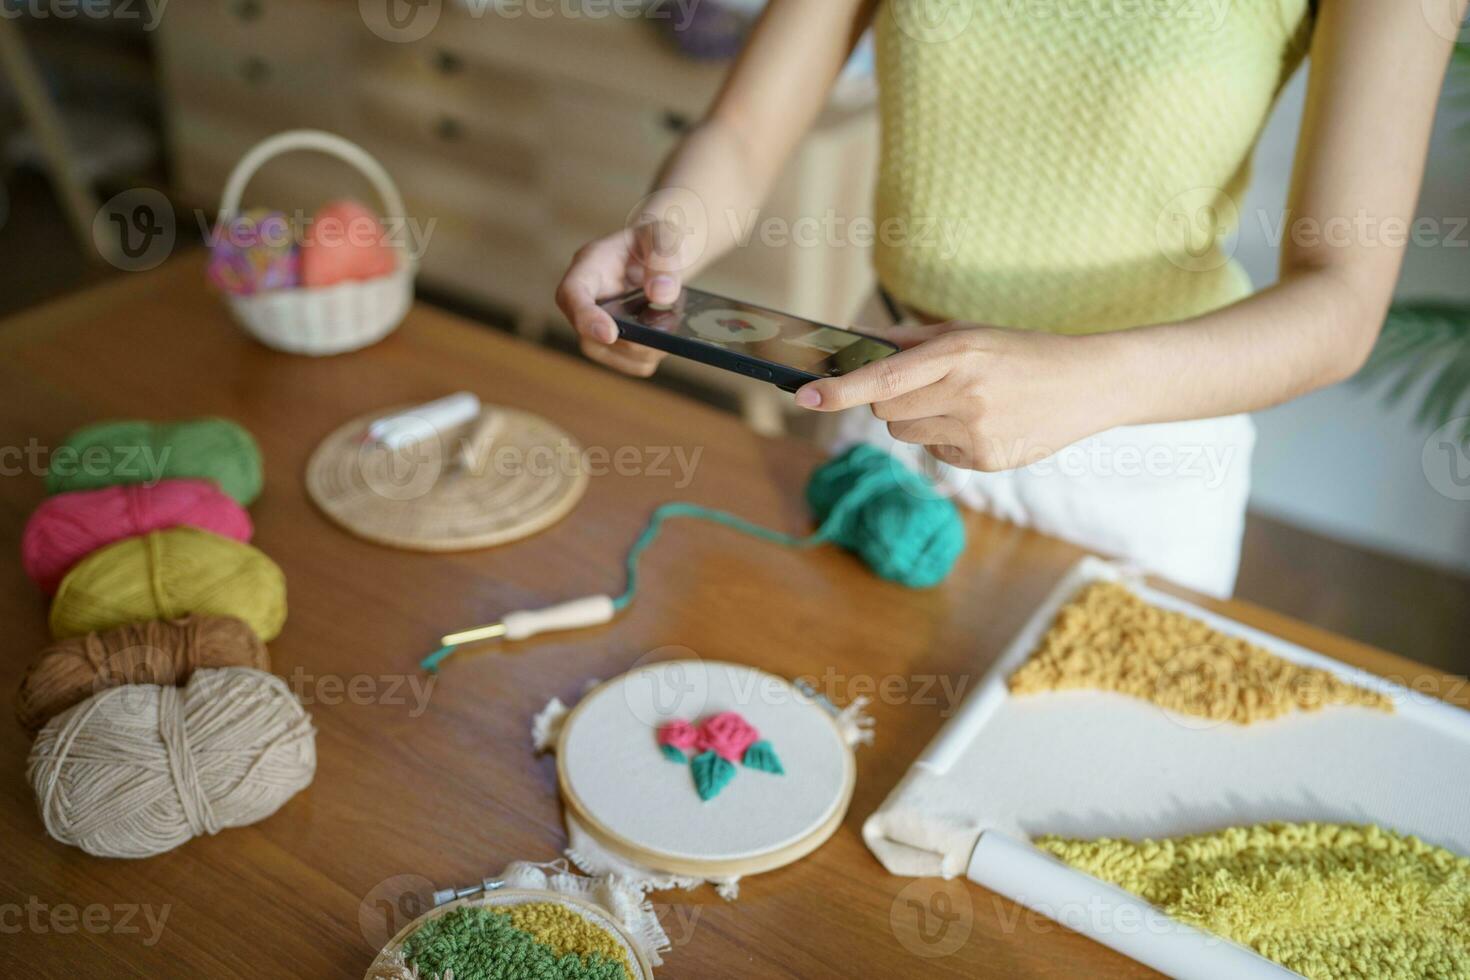 Asian Woman taking smartphone photo Punch needle. phone posting on social networks in studio workshop. designer workplace Handmade craft project DIY embroidery